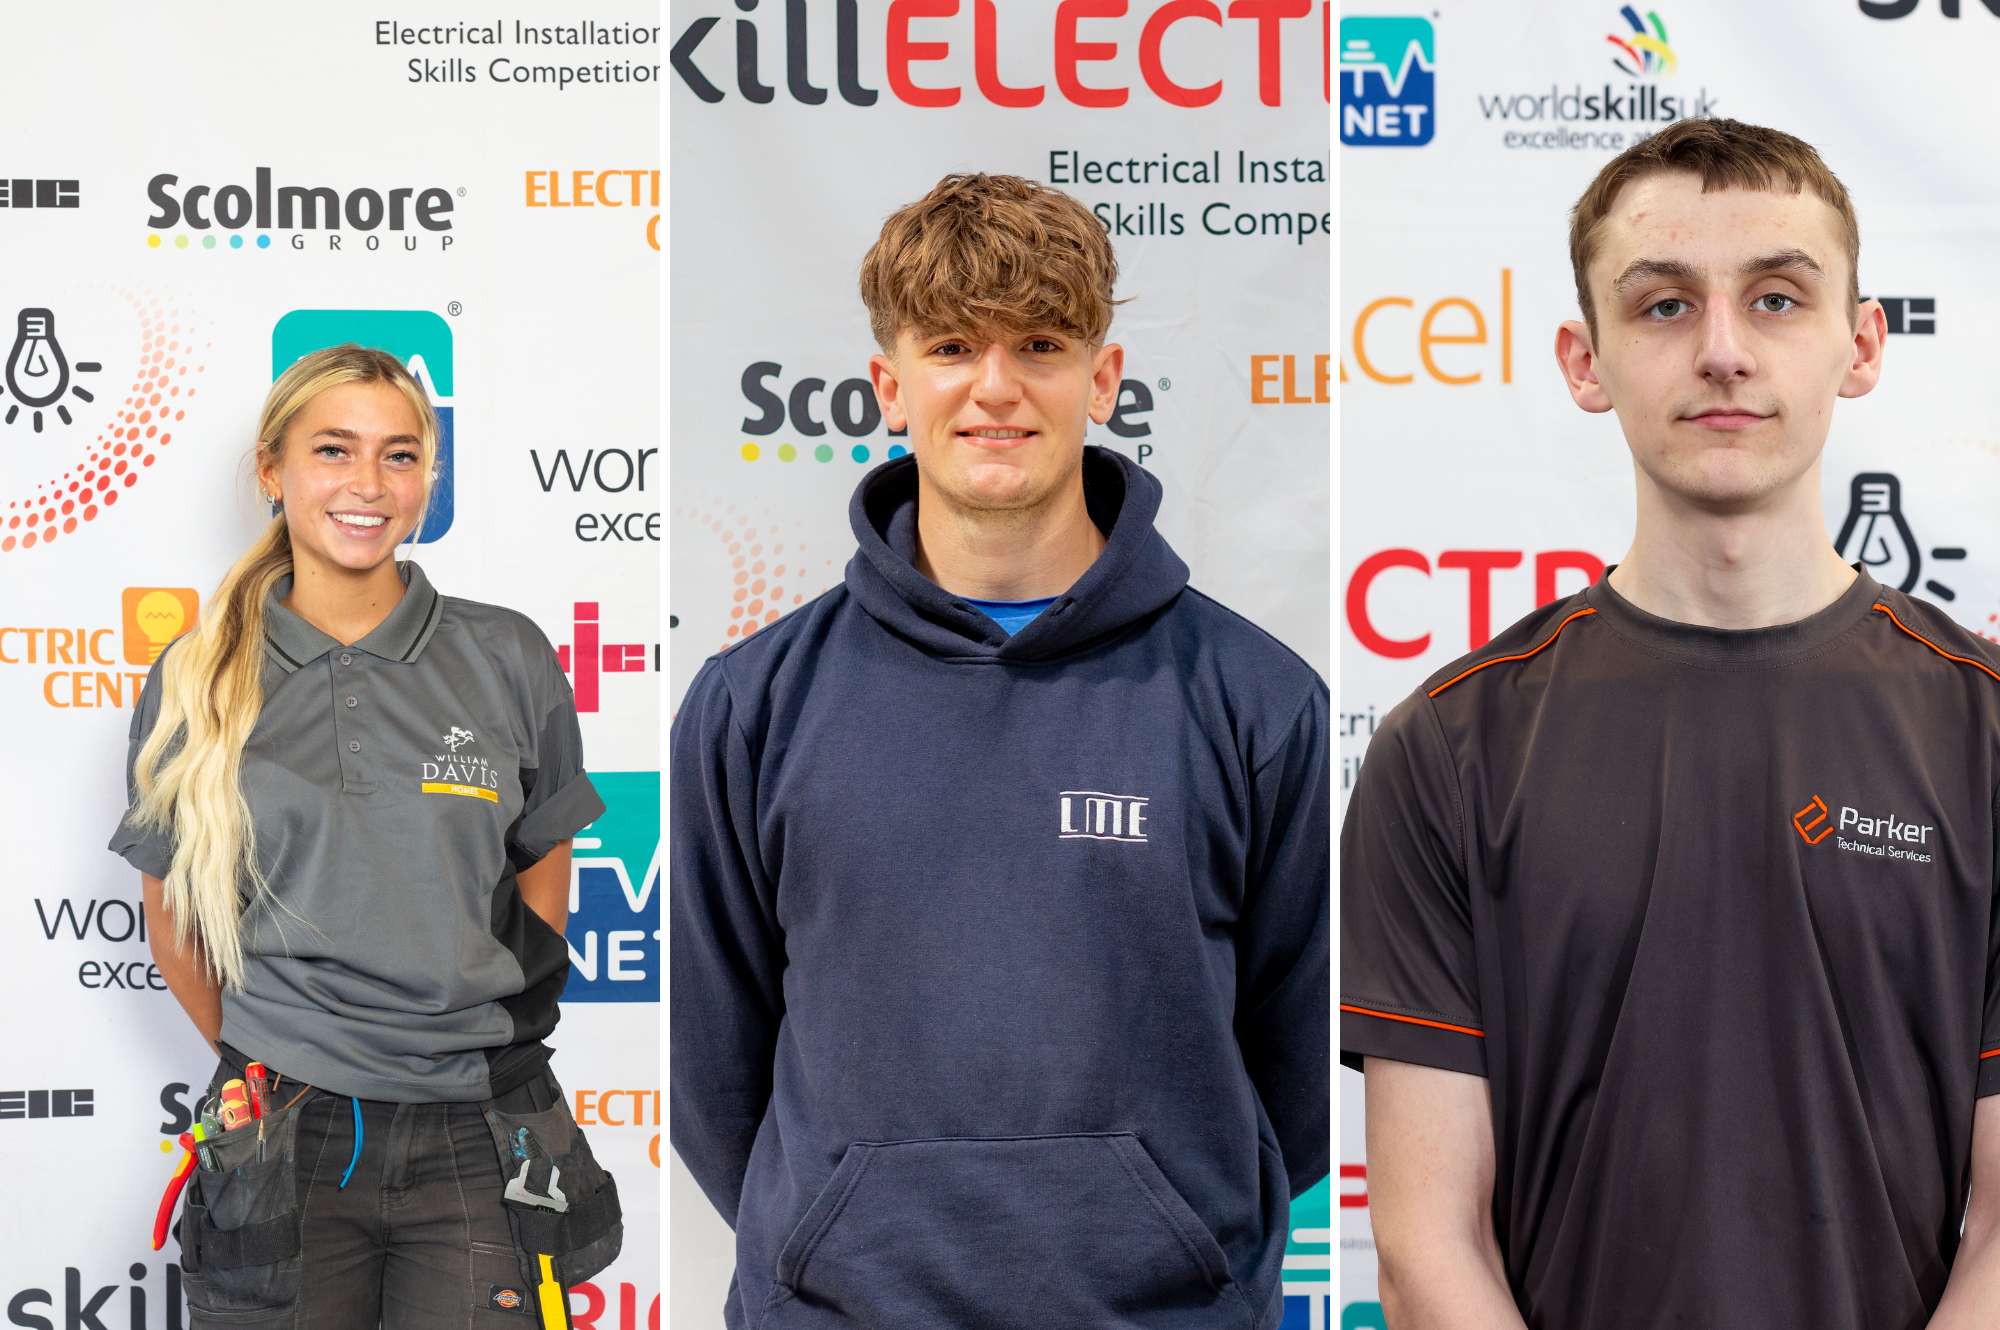 Three electrical apprentices pose for picture